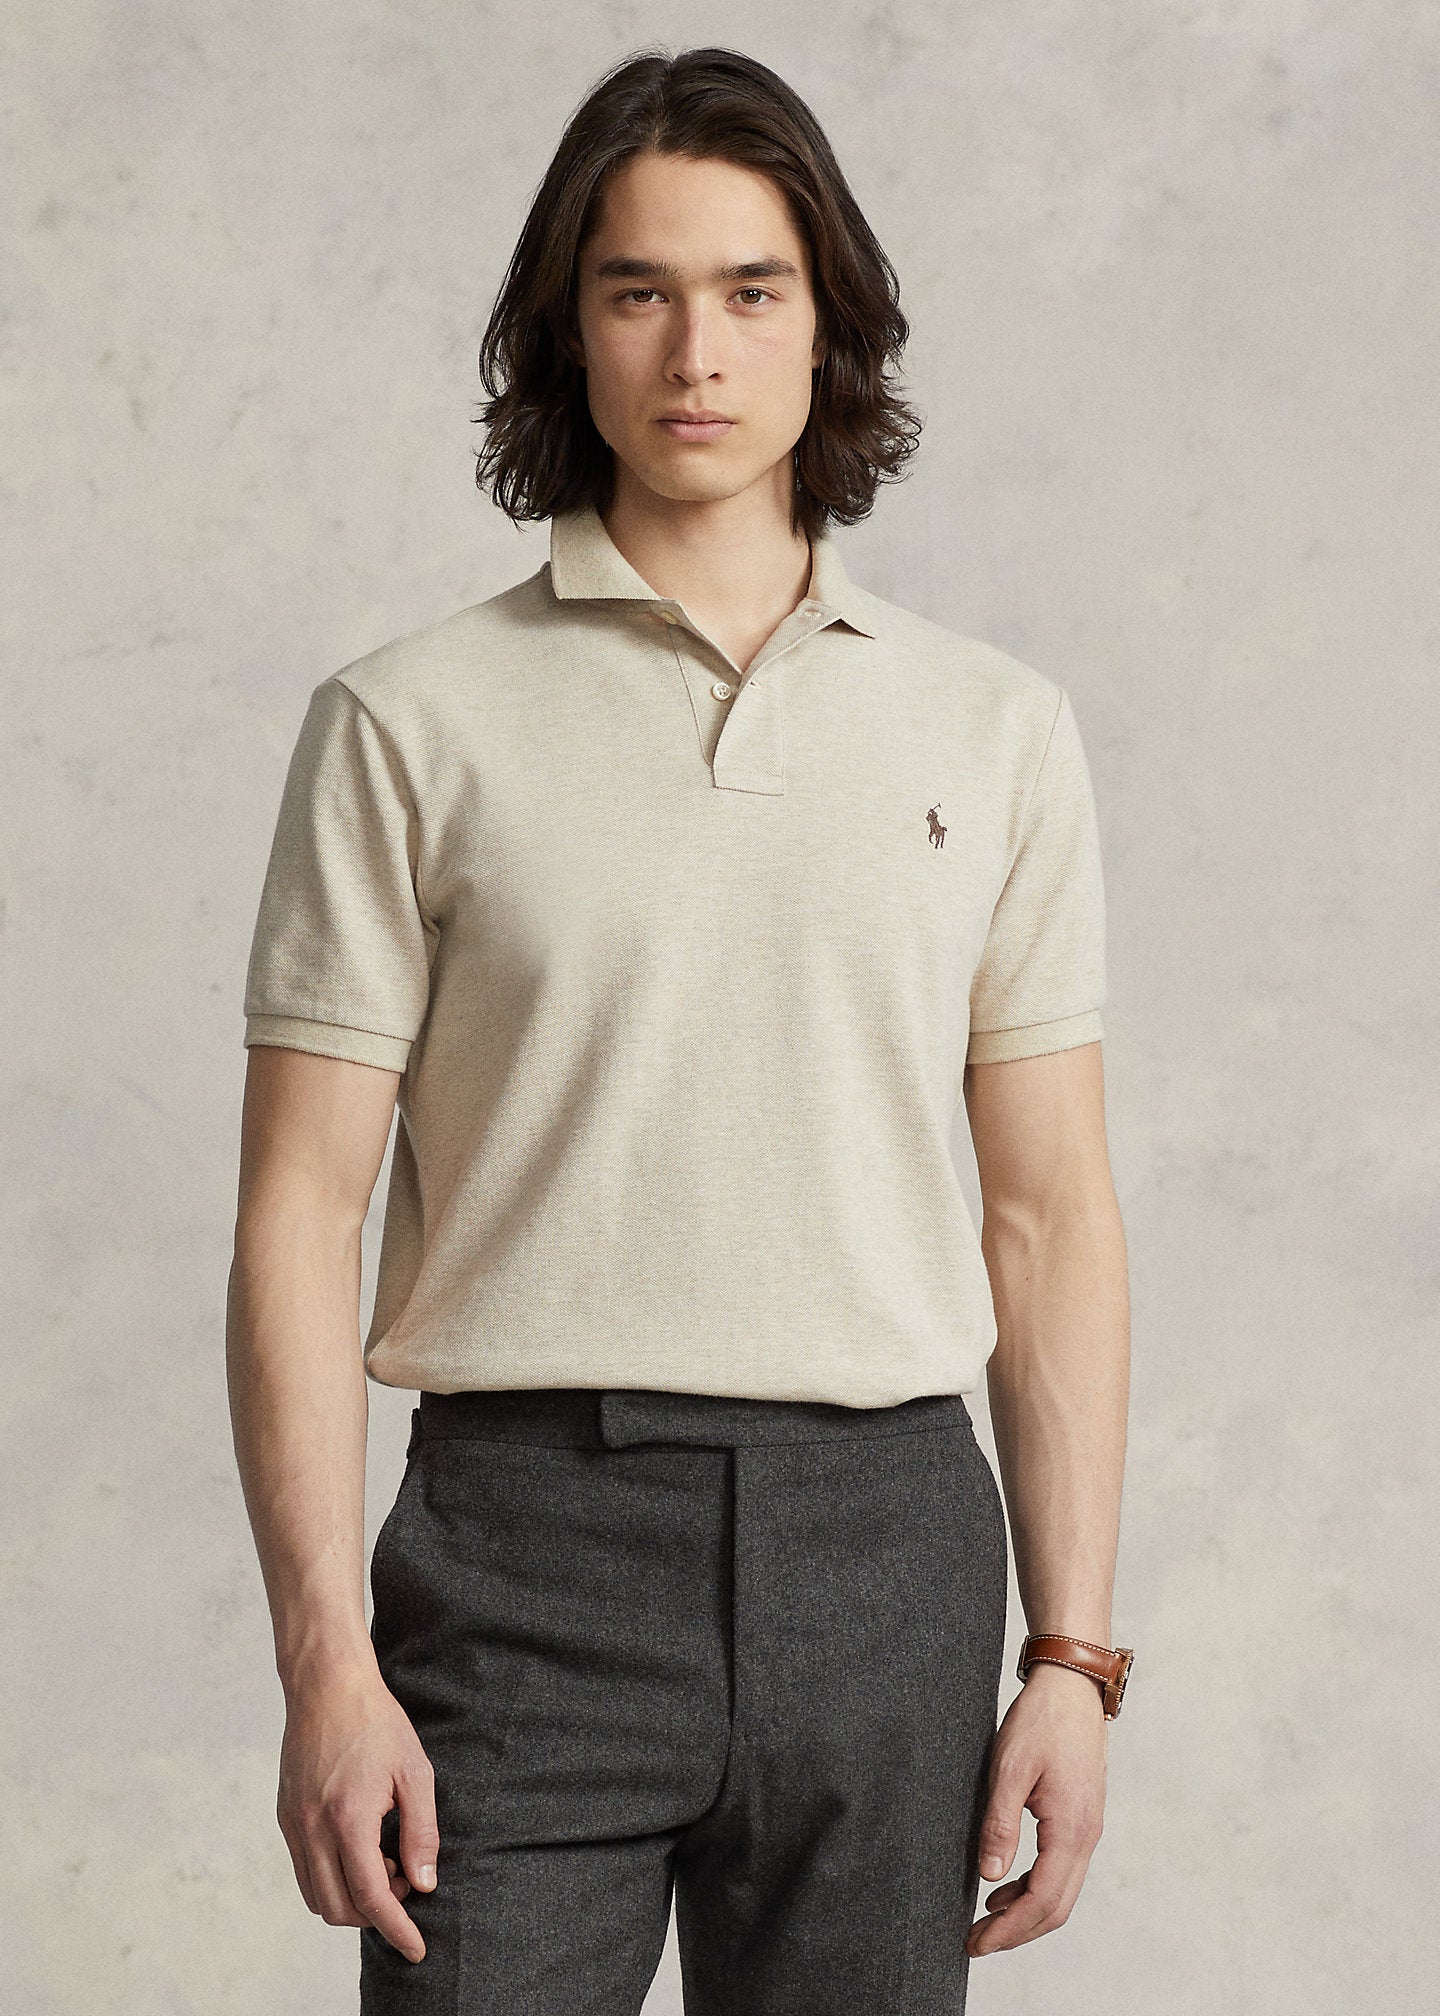 Polo Ralph Lauren SS Knit Polo Shirt 215 Expedition Dune Heather